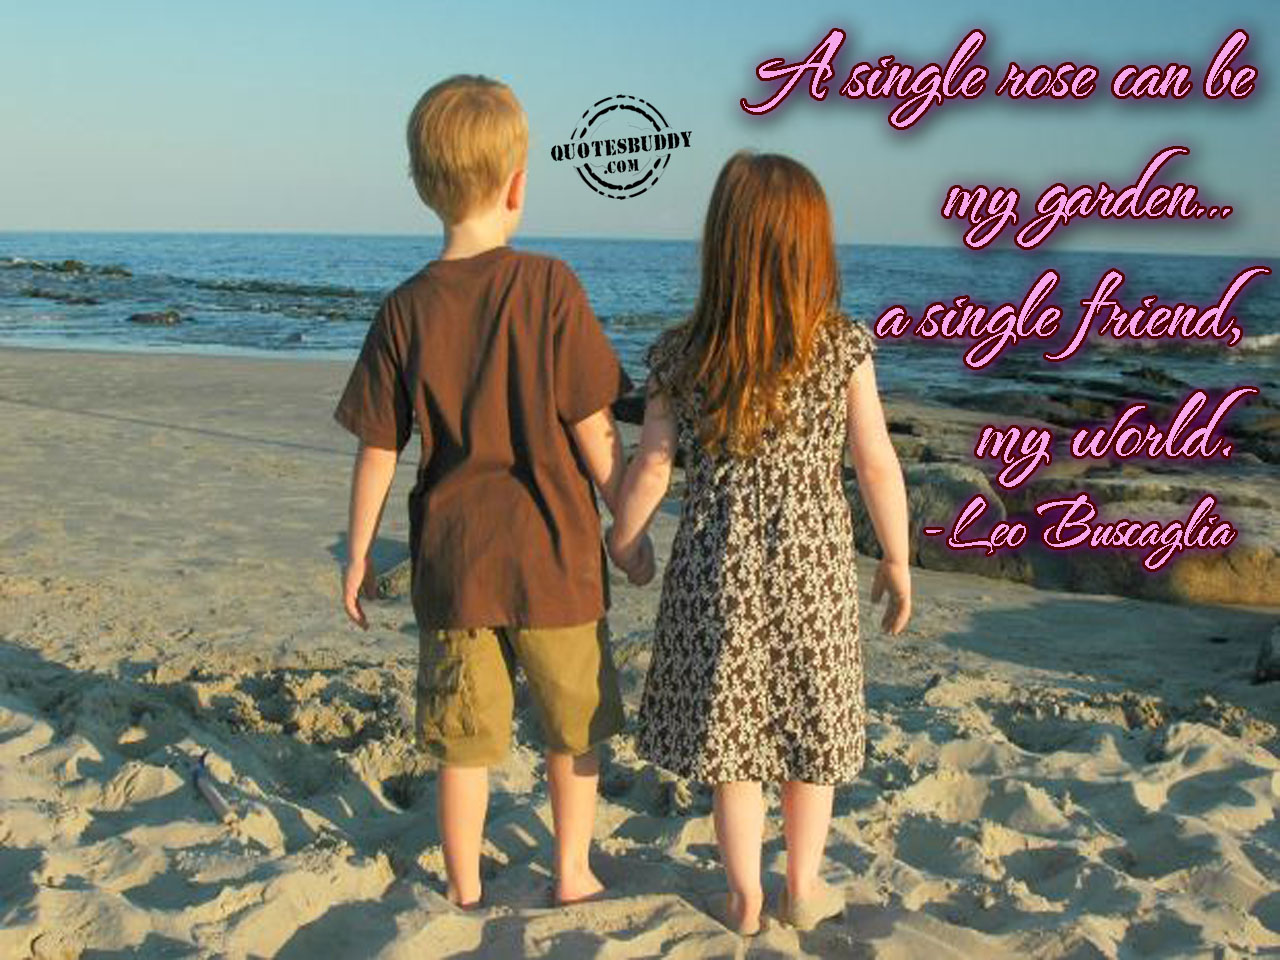 Girl And Boy Can Be Best Friends Quotes Quotesgram